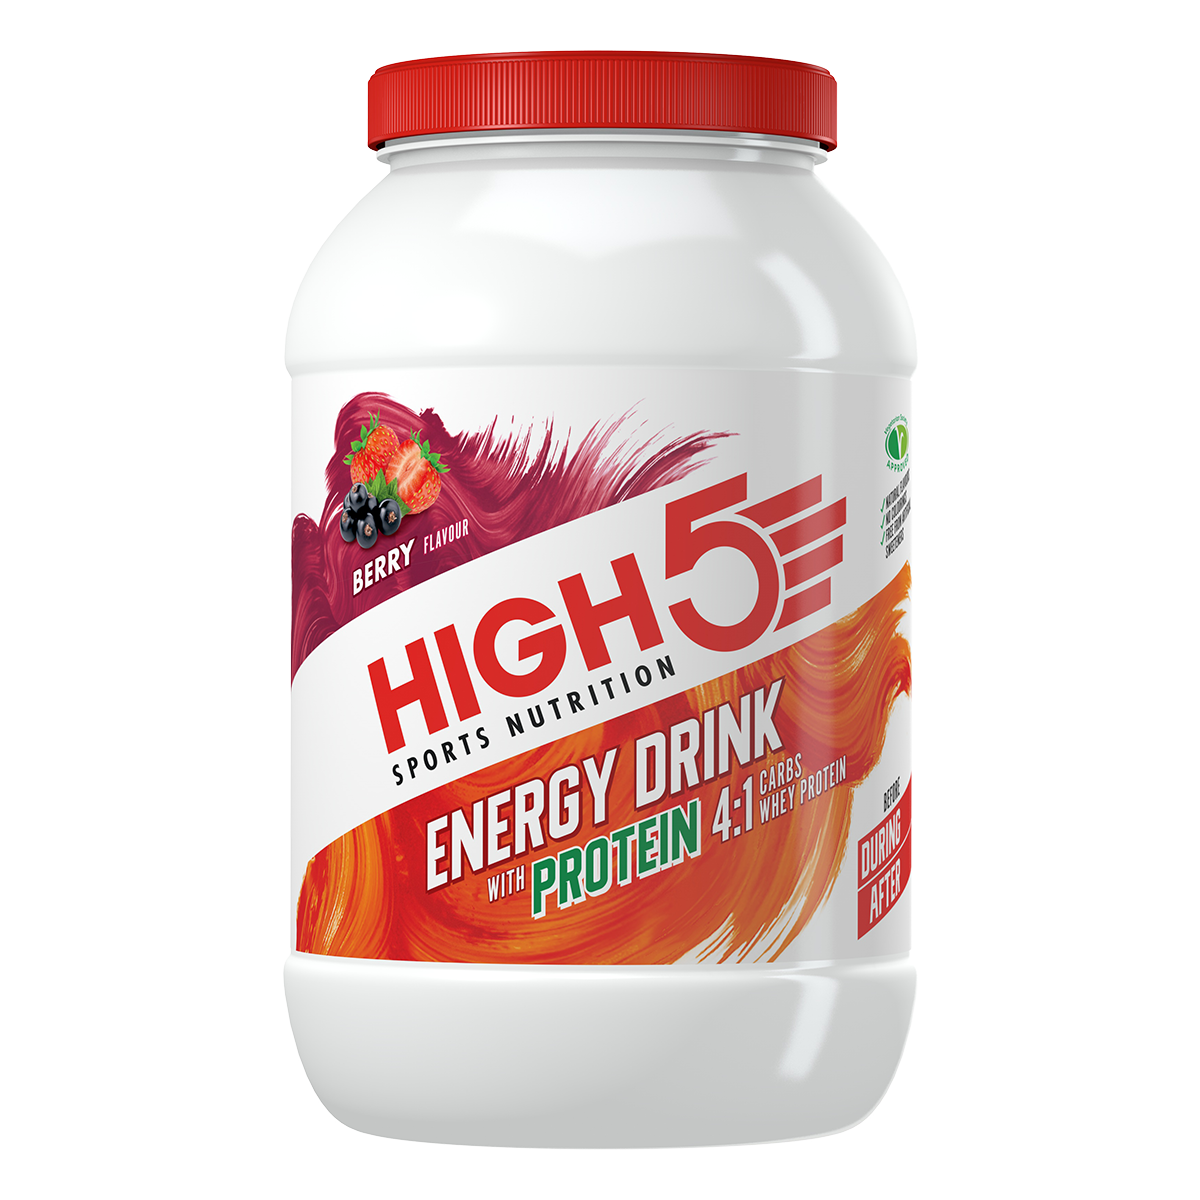 ENERGY DRINK WITH PROTEIN